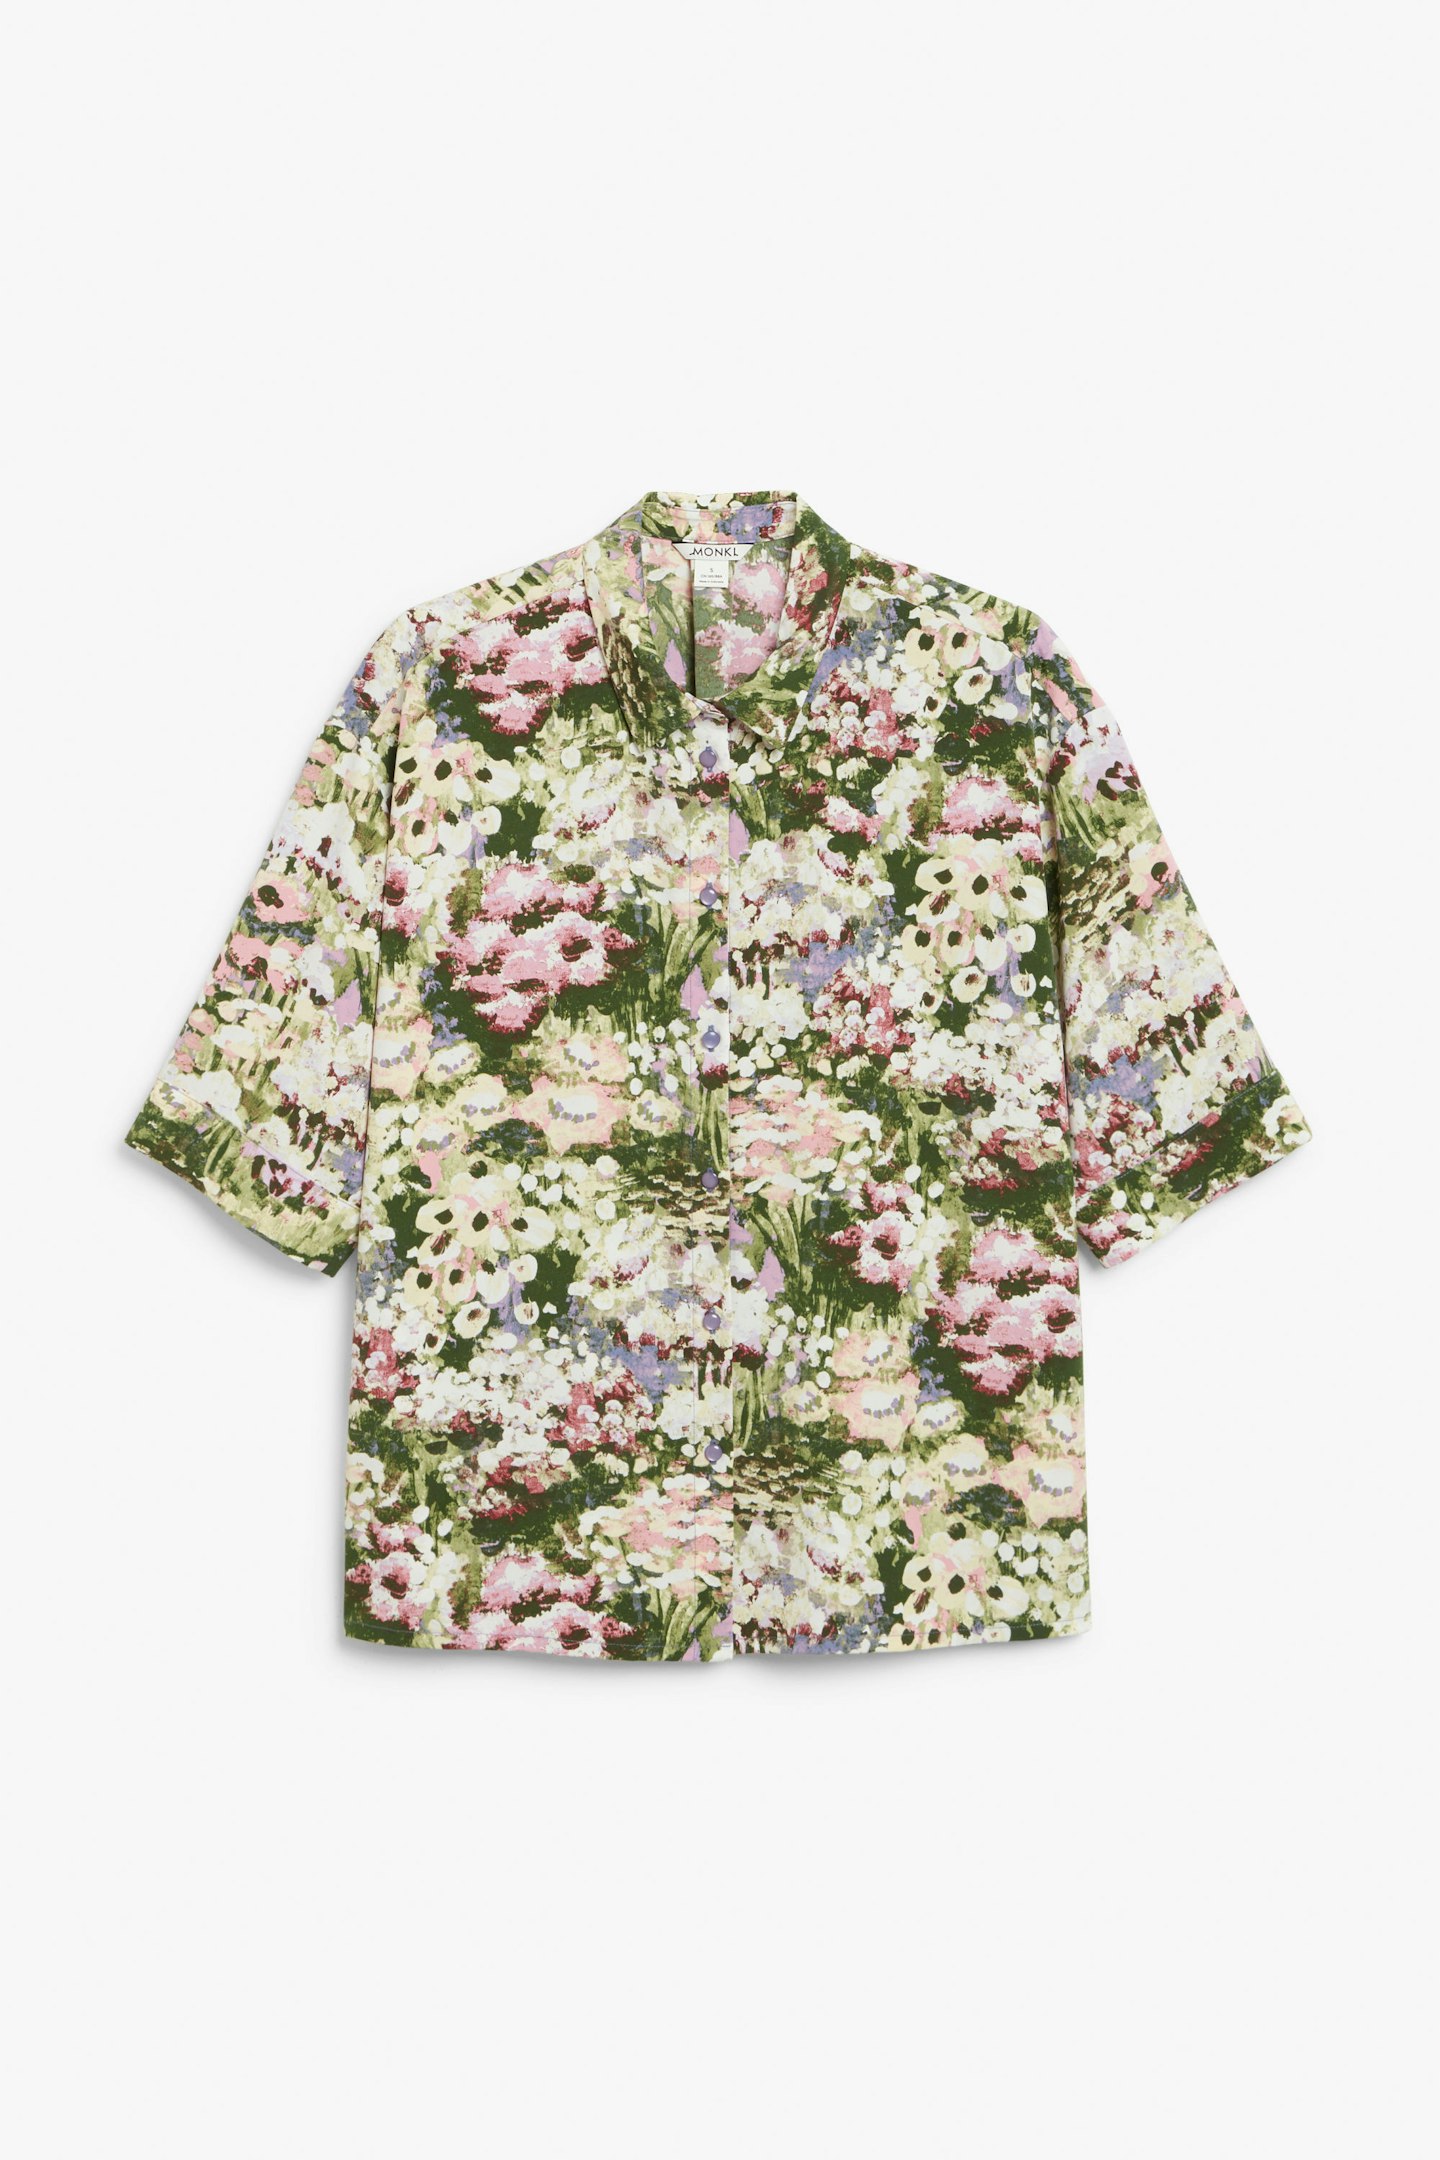 Monki, Oversized Button-Up Blouse, WAS £25 NOW £15